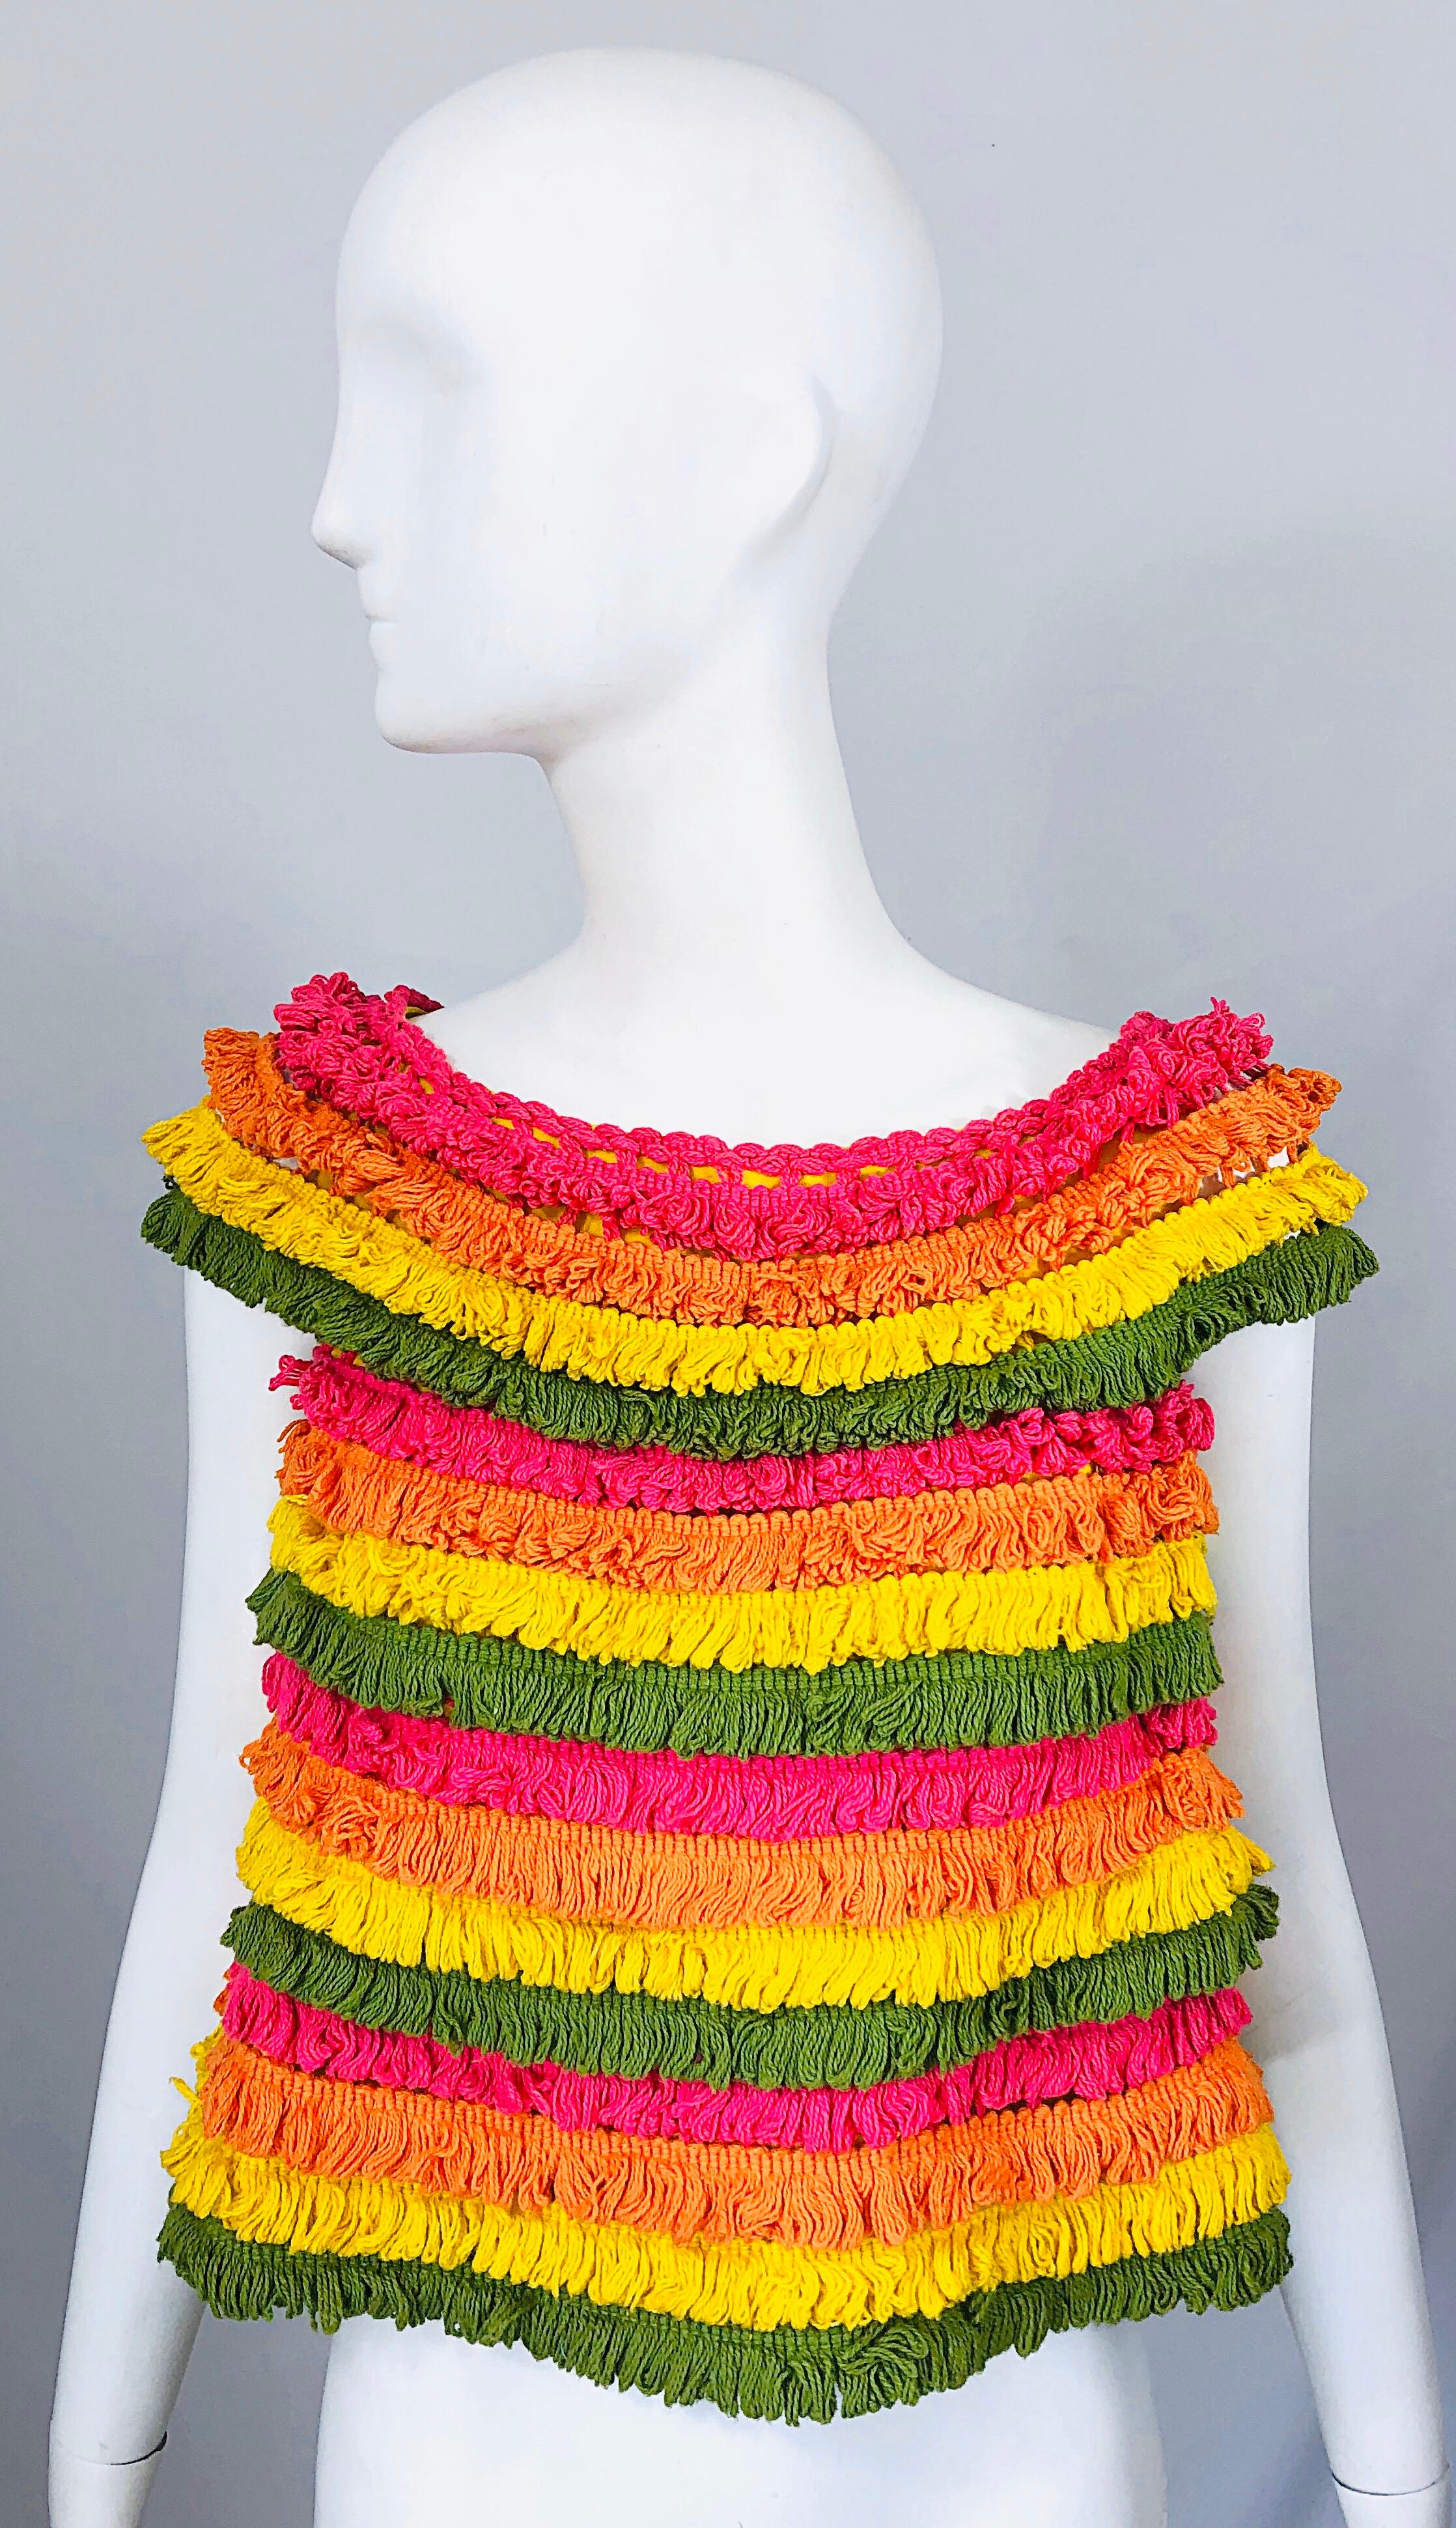 Amazing 1960s GENE OSTROW of Geno of California fringe trapeze crop top! Features vibrant colors of pink, orange, olive green and yellow throughout. Canary yellow base with tiers of cotton fringe. Simply slips over the head. Flattering flared hem.